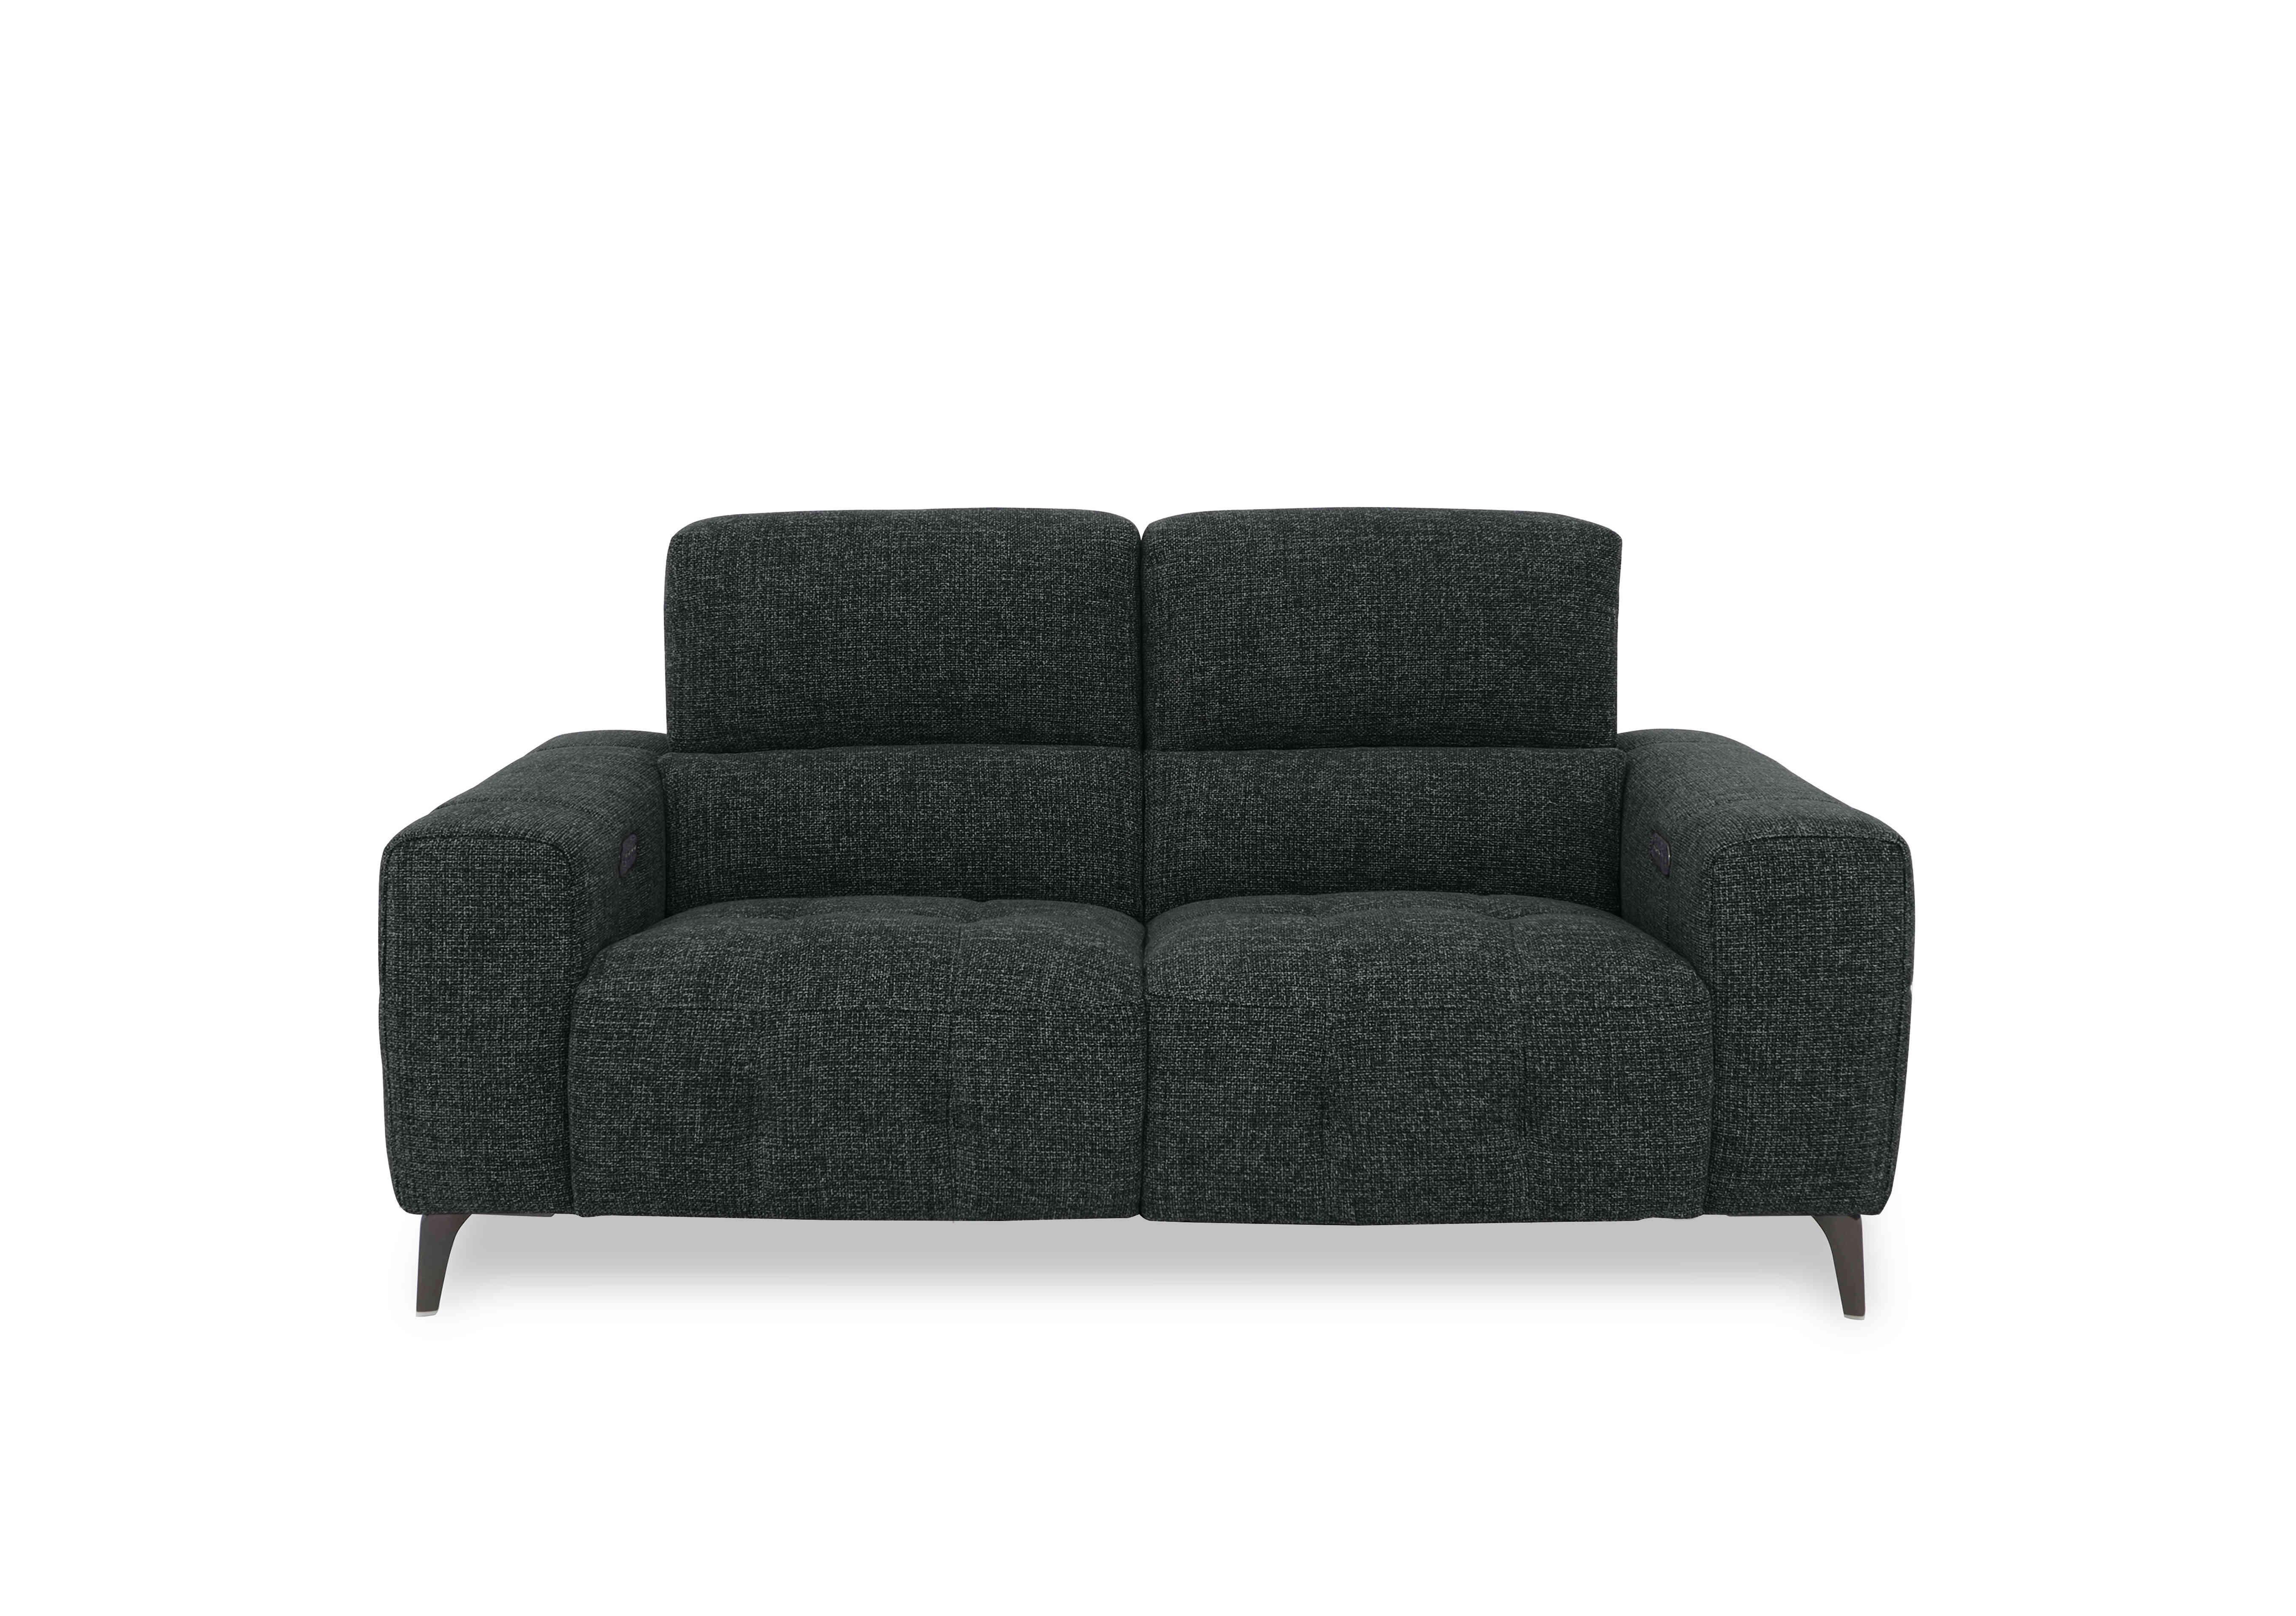 New York 2 Seater Fabric Sofa in Fab-Cac-R463 Black Mica on Furniture Village